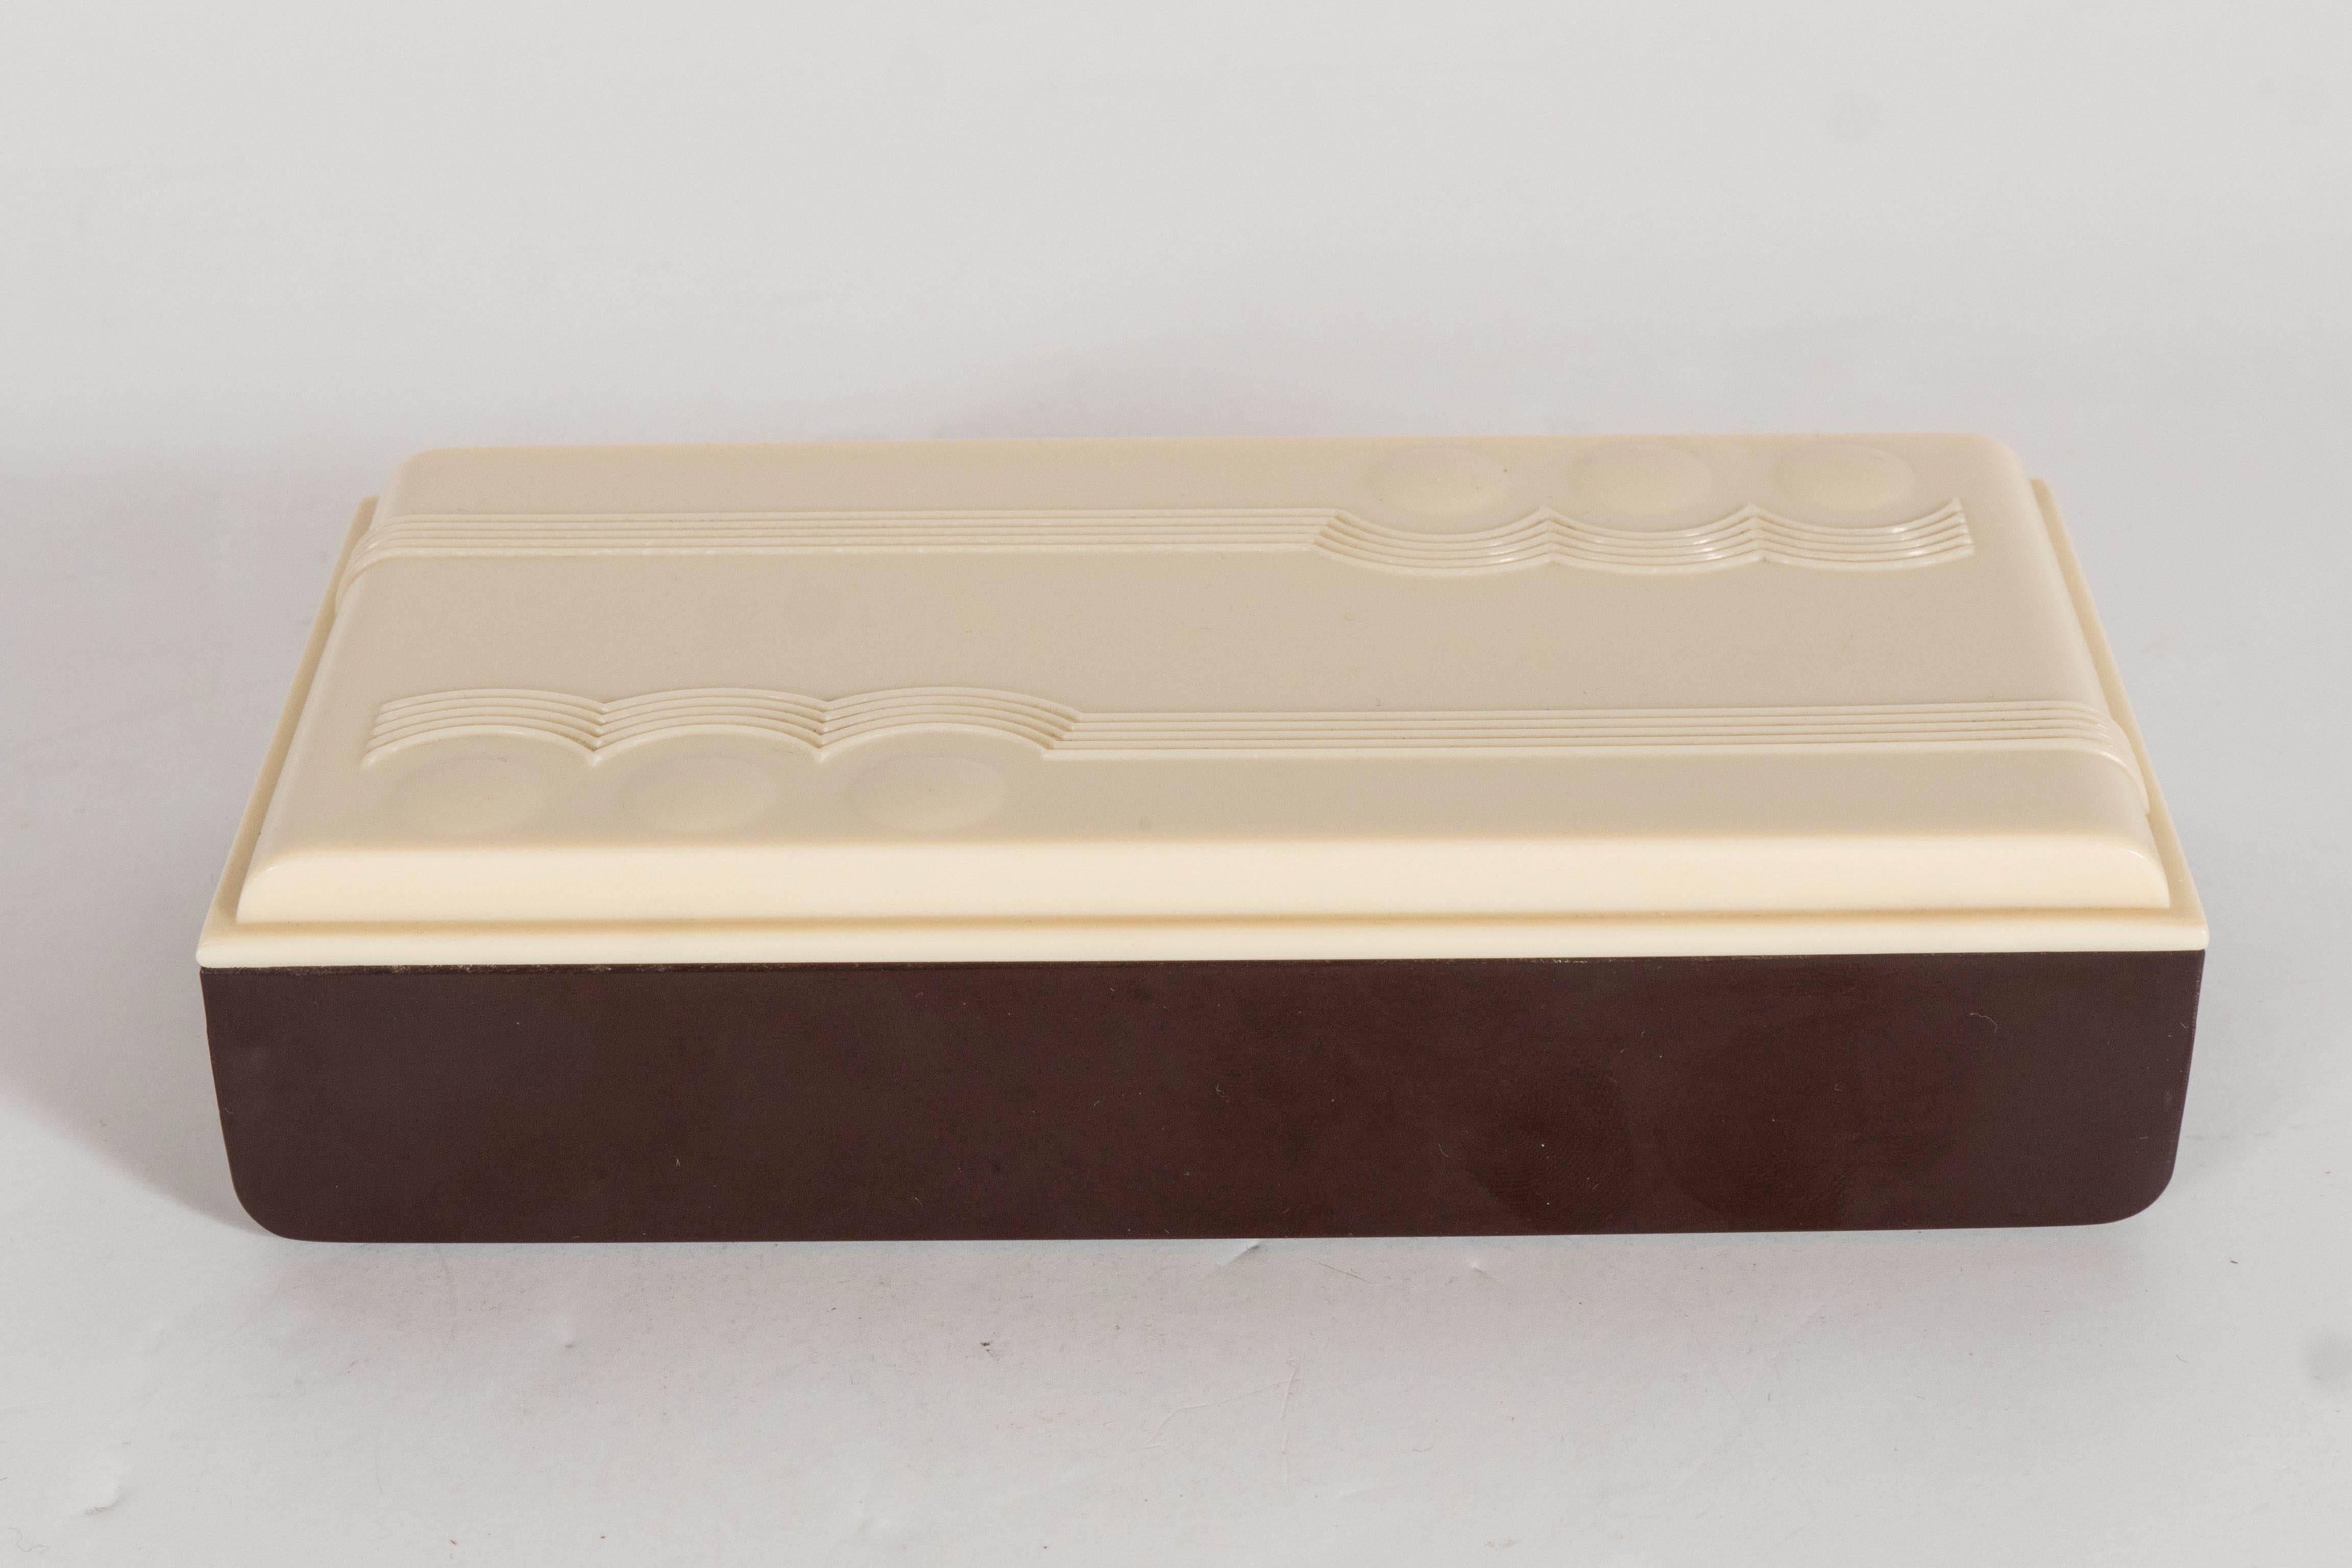 A lovely piece of American Art Deco. A cognac brown bakelite box and ivory-colored lid is adorned with typical deco detailing along its top and down its sides. An excellent addition to any deco lover's collection. Can hold jewelry, keys, cards or